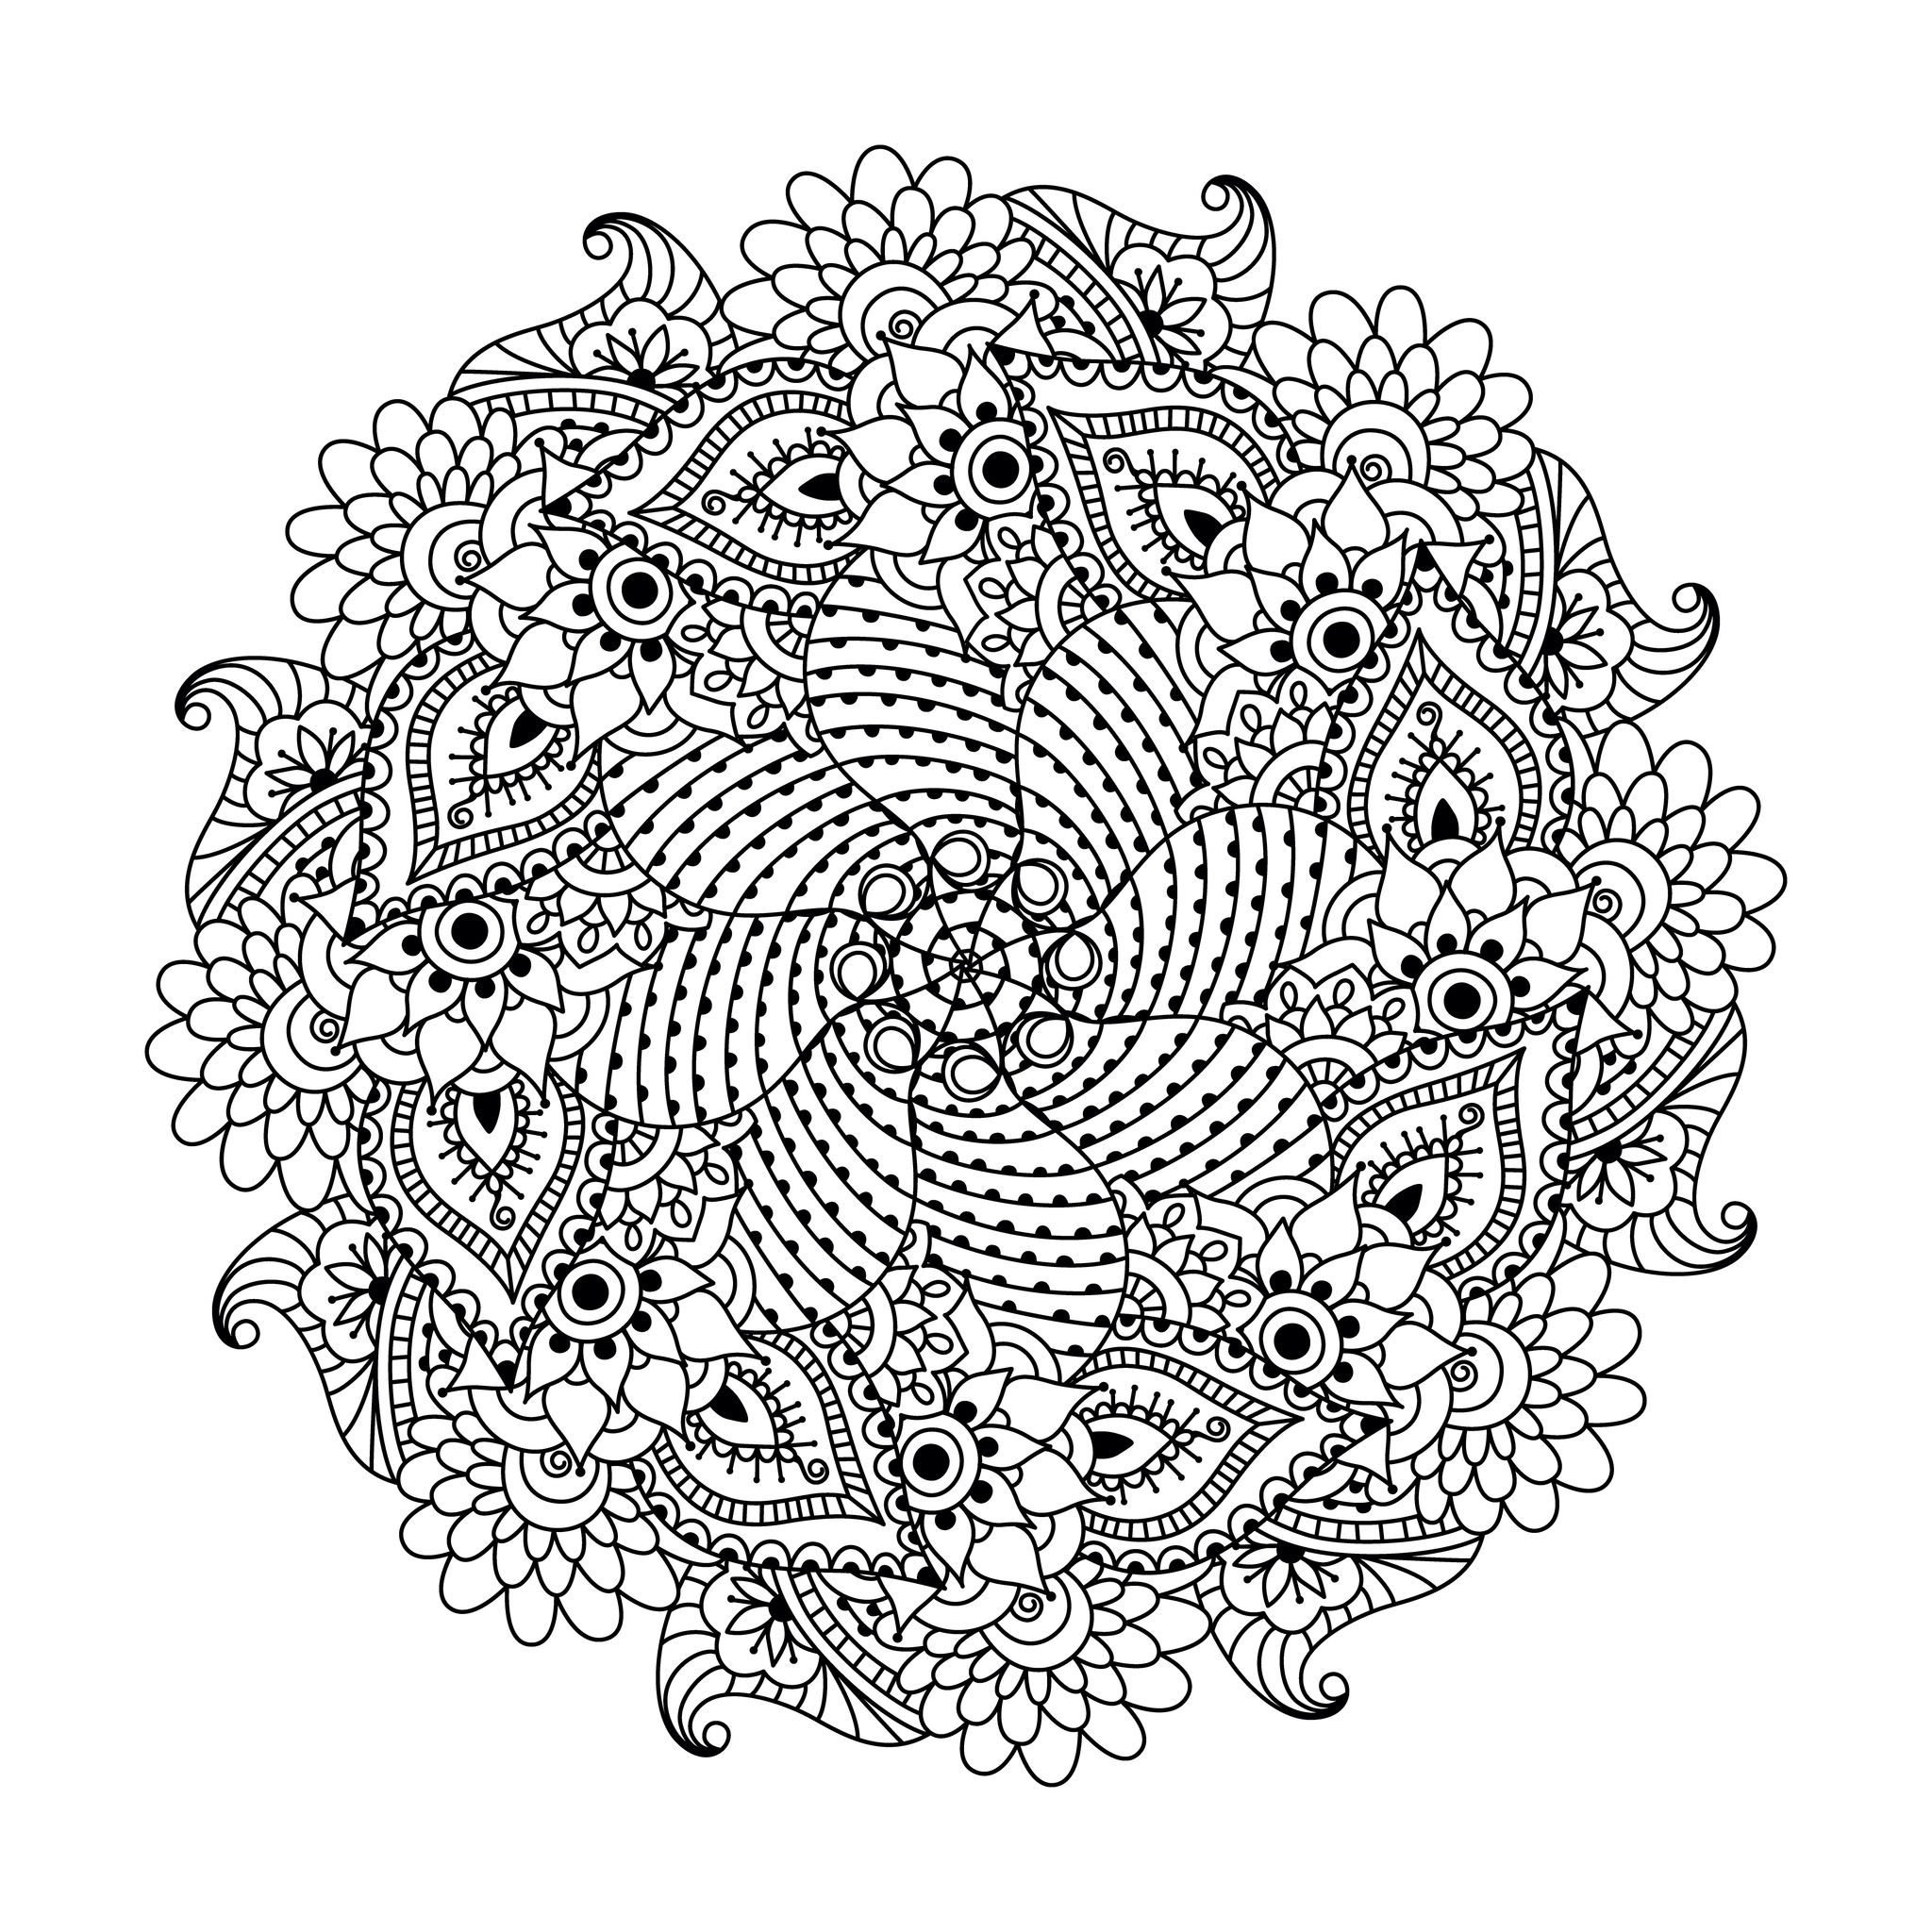 Symmetrical Mandala with vegetal designs. A drawing quite difficult to color, perfect if you like to color small areas, and if you like various details.